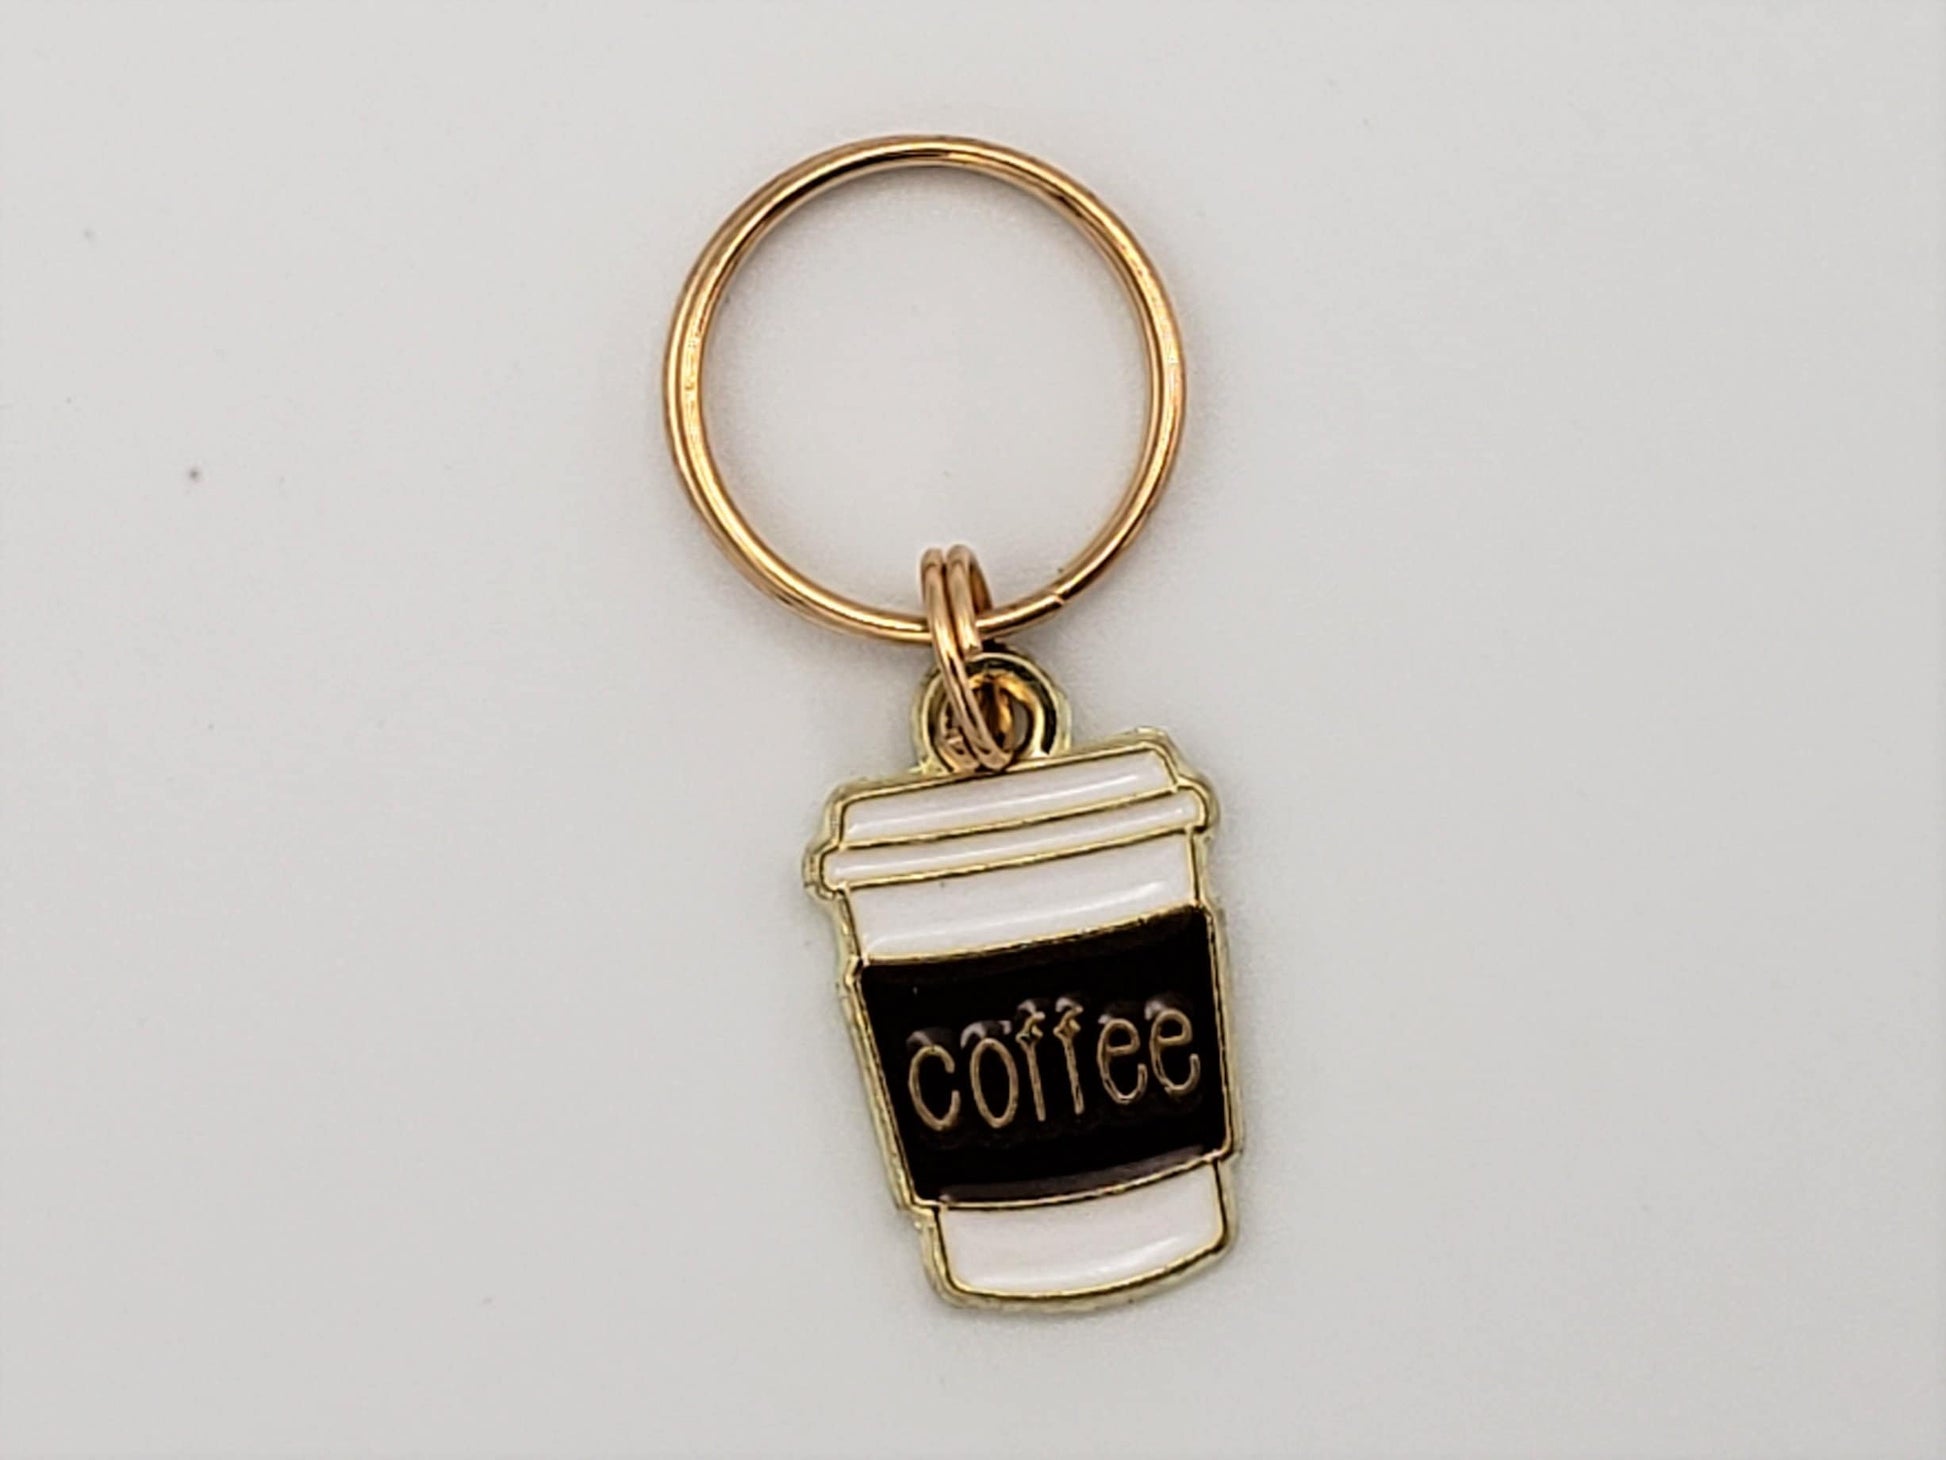 Coffee Cup Stitch Markers for Knitting 3pc | Crochet stitch marker, progress keeper, project bag charm, crochet accessory, knitting marker